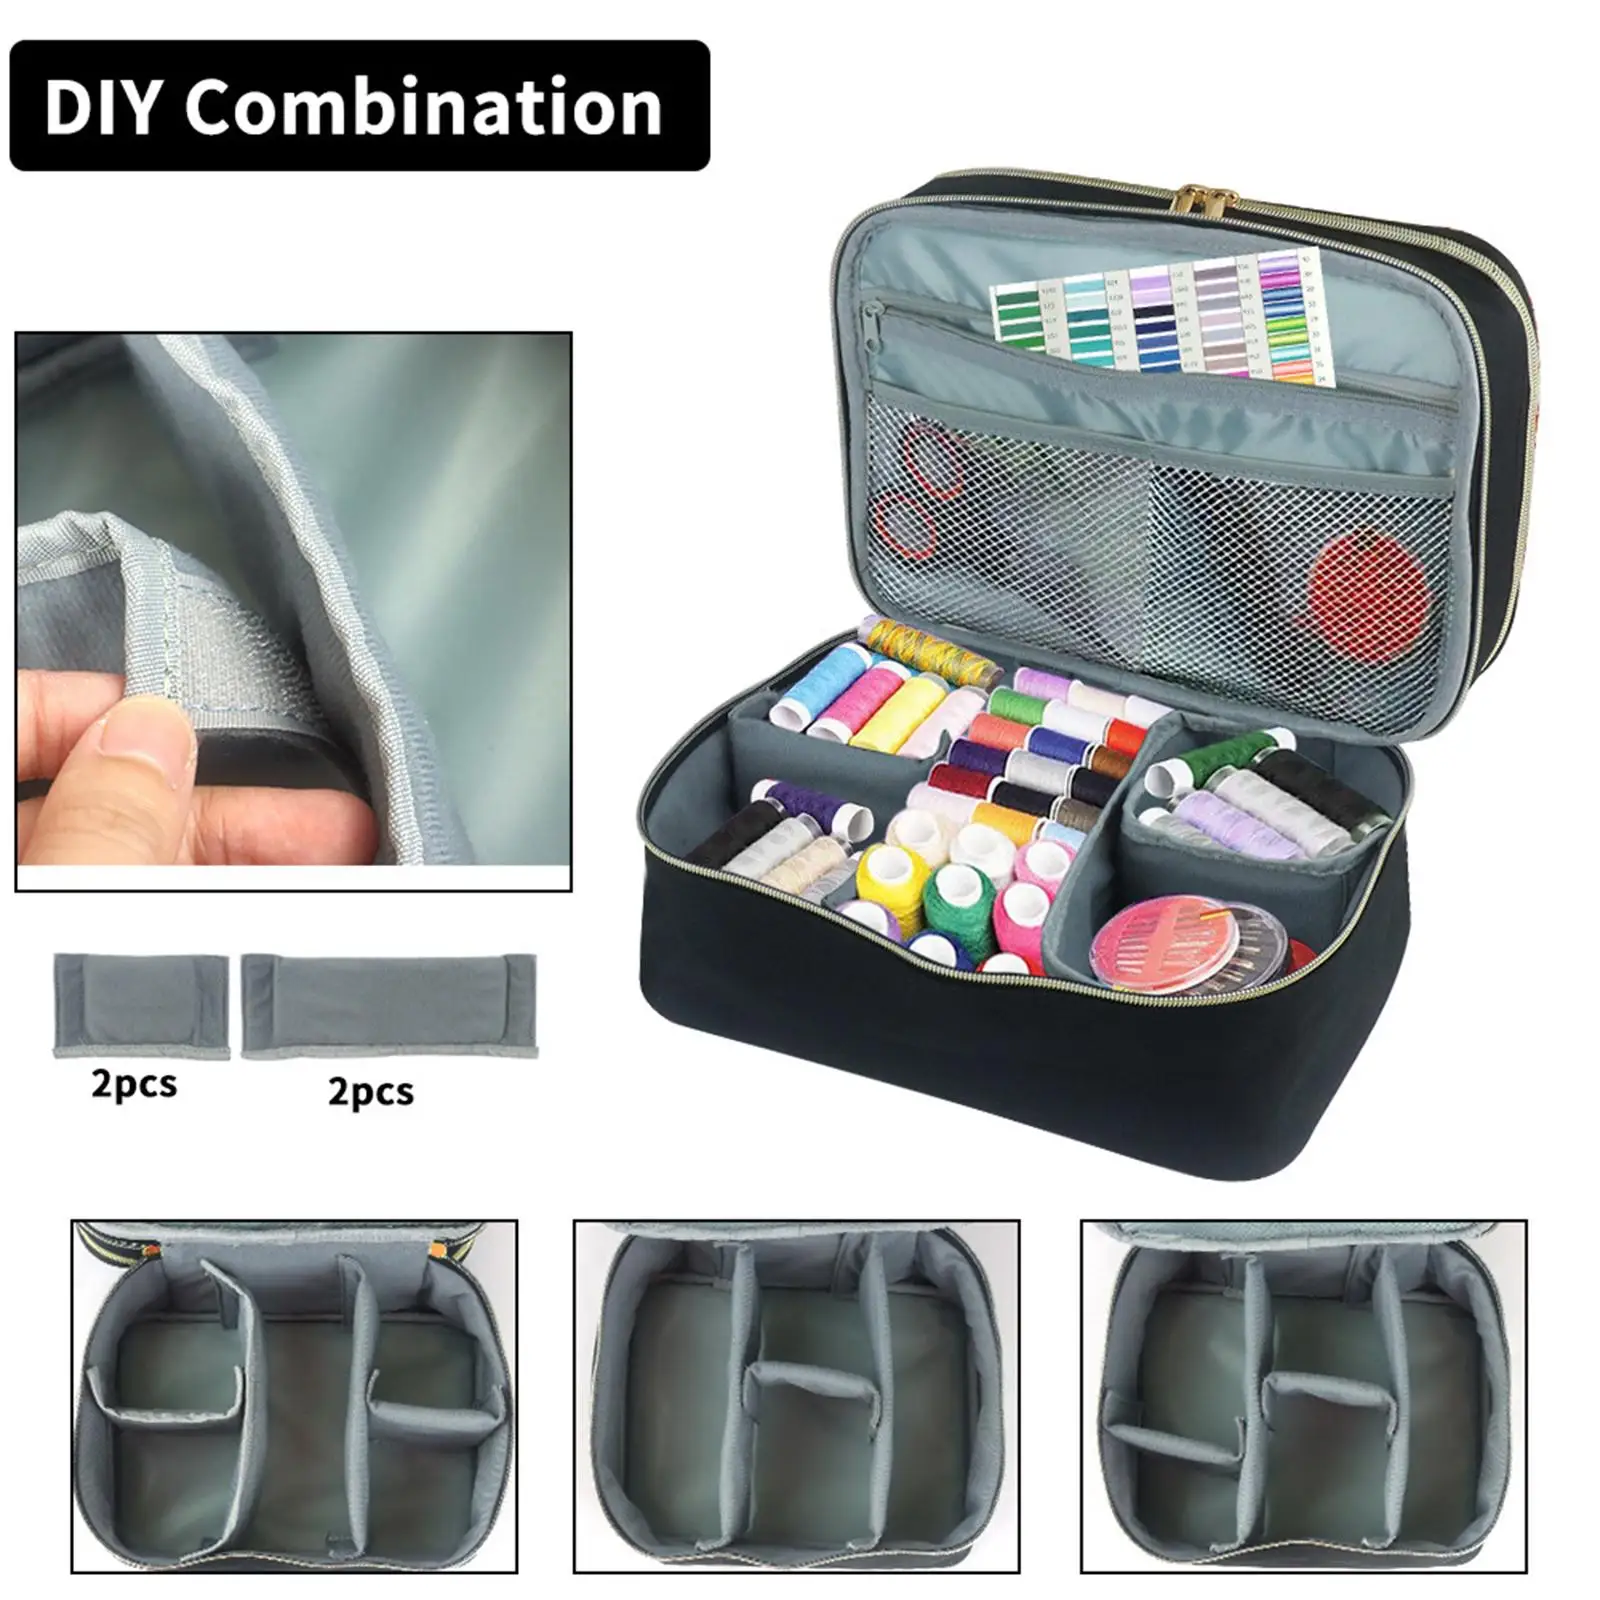 Sewing Accessories Storage Box Supplies Durable for Travel Scissors